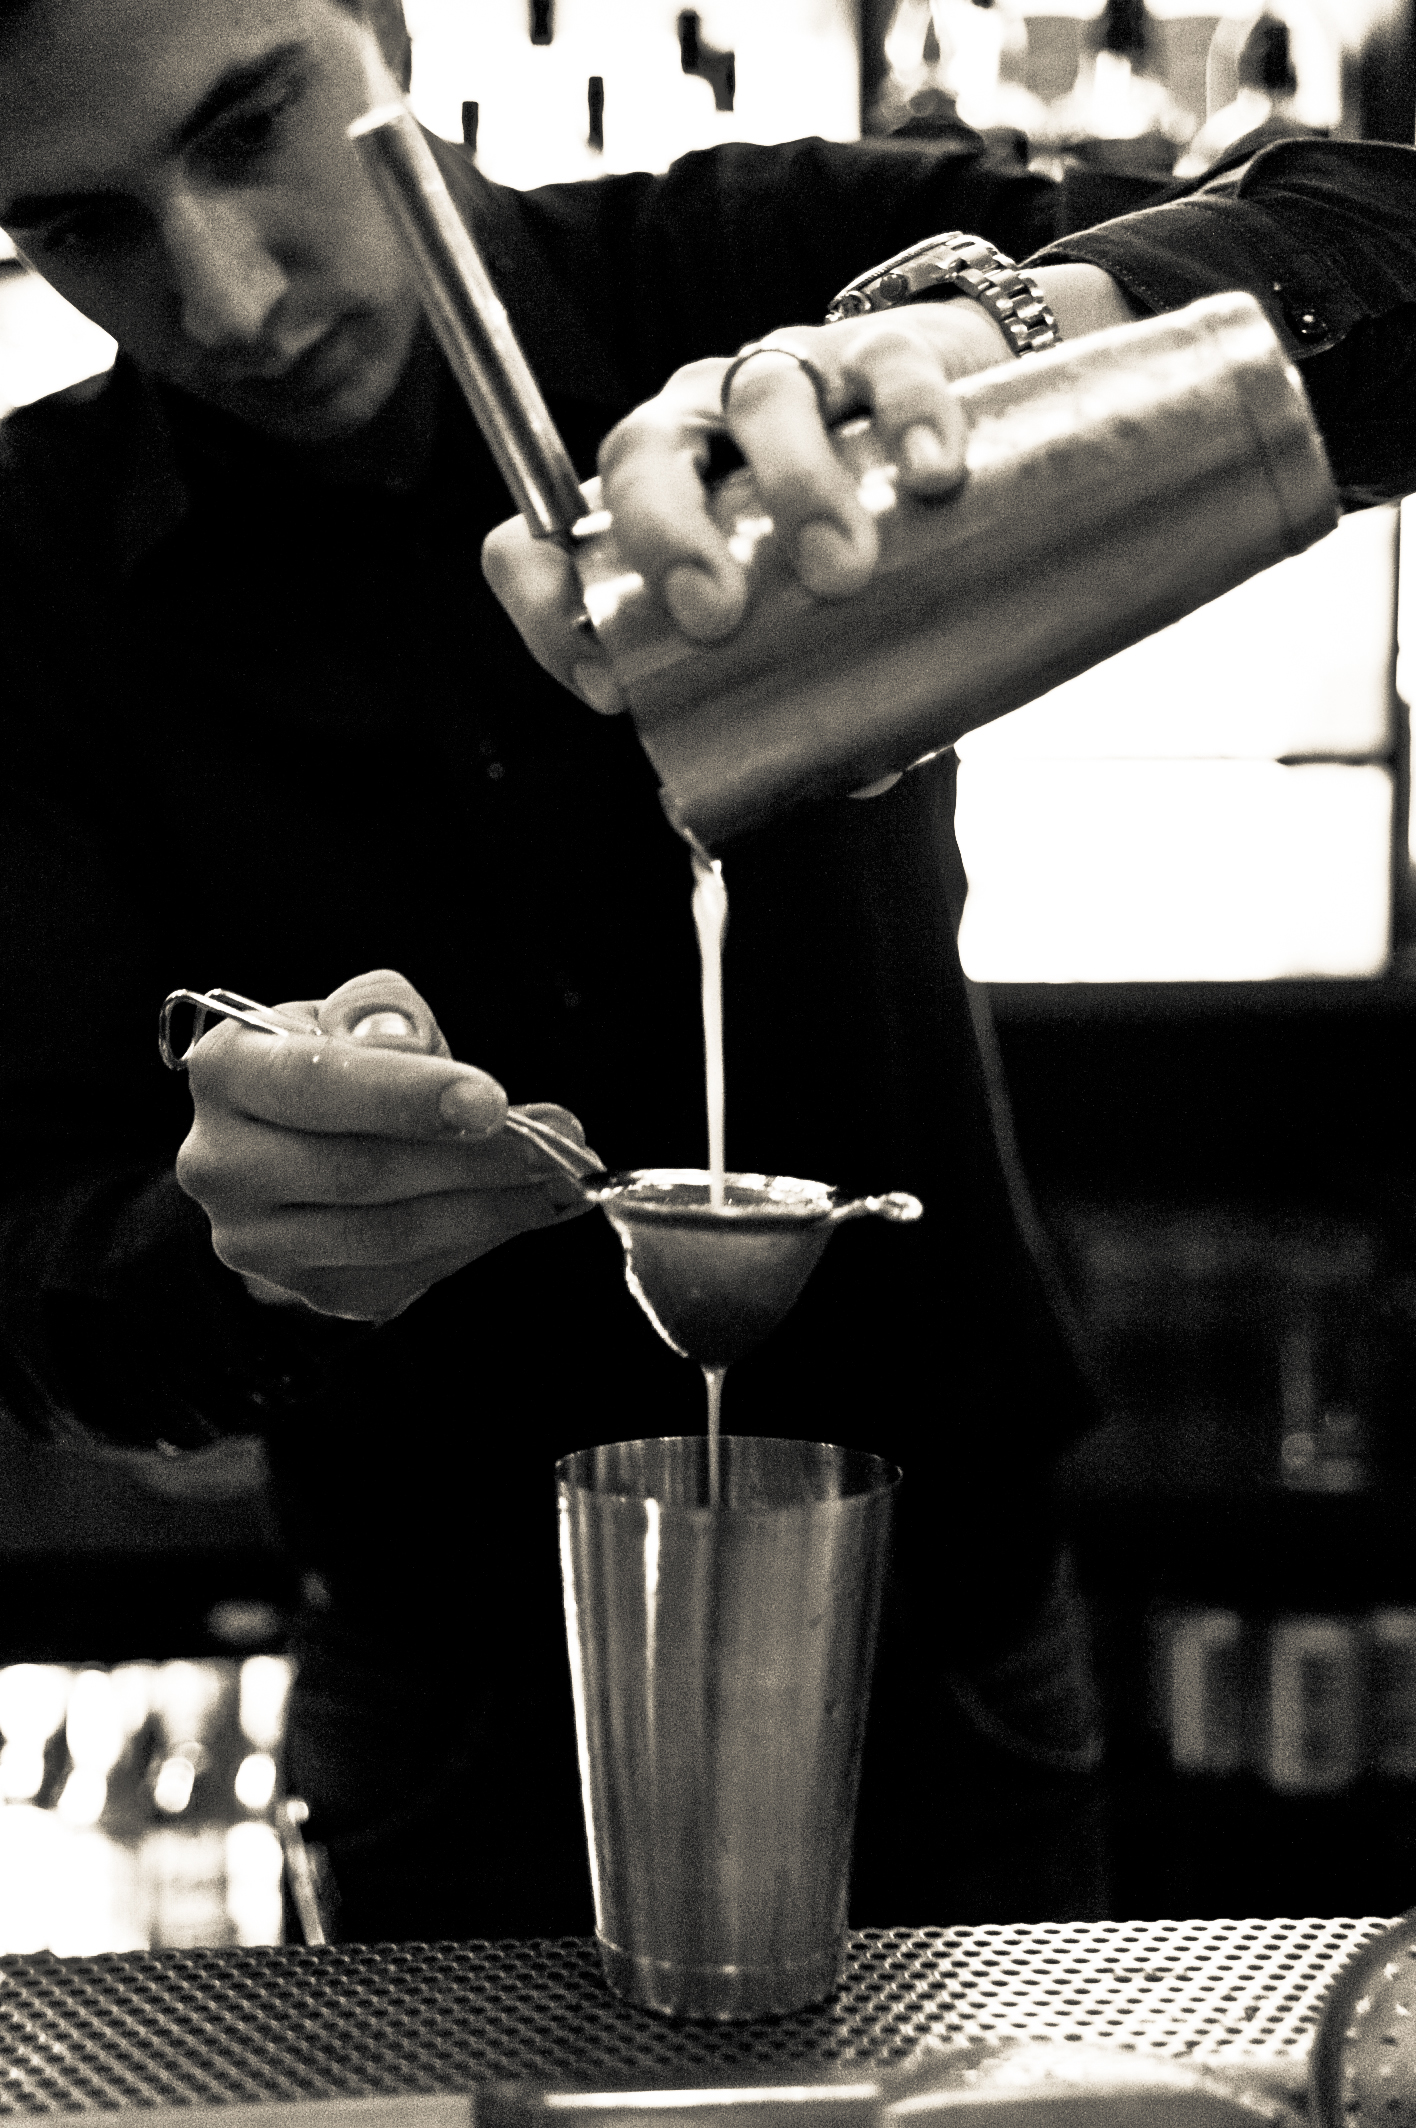 Bartenders at work by Infosbar : le CV express de Jean-Philippe Causse